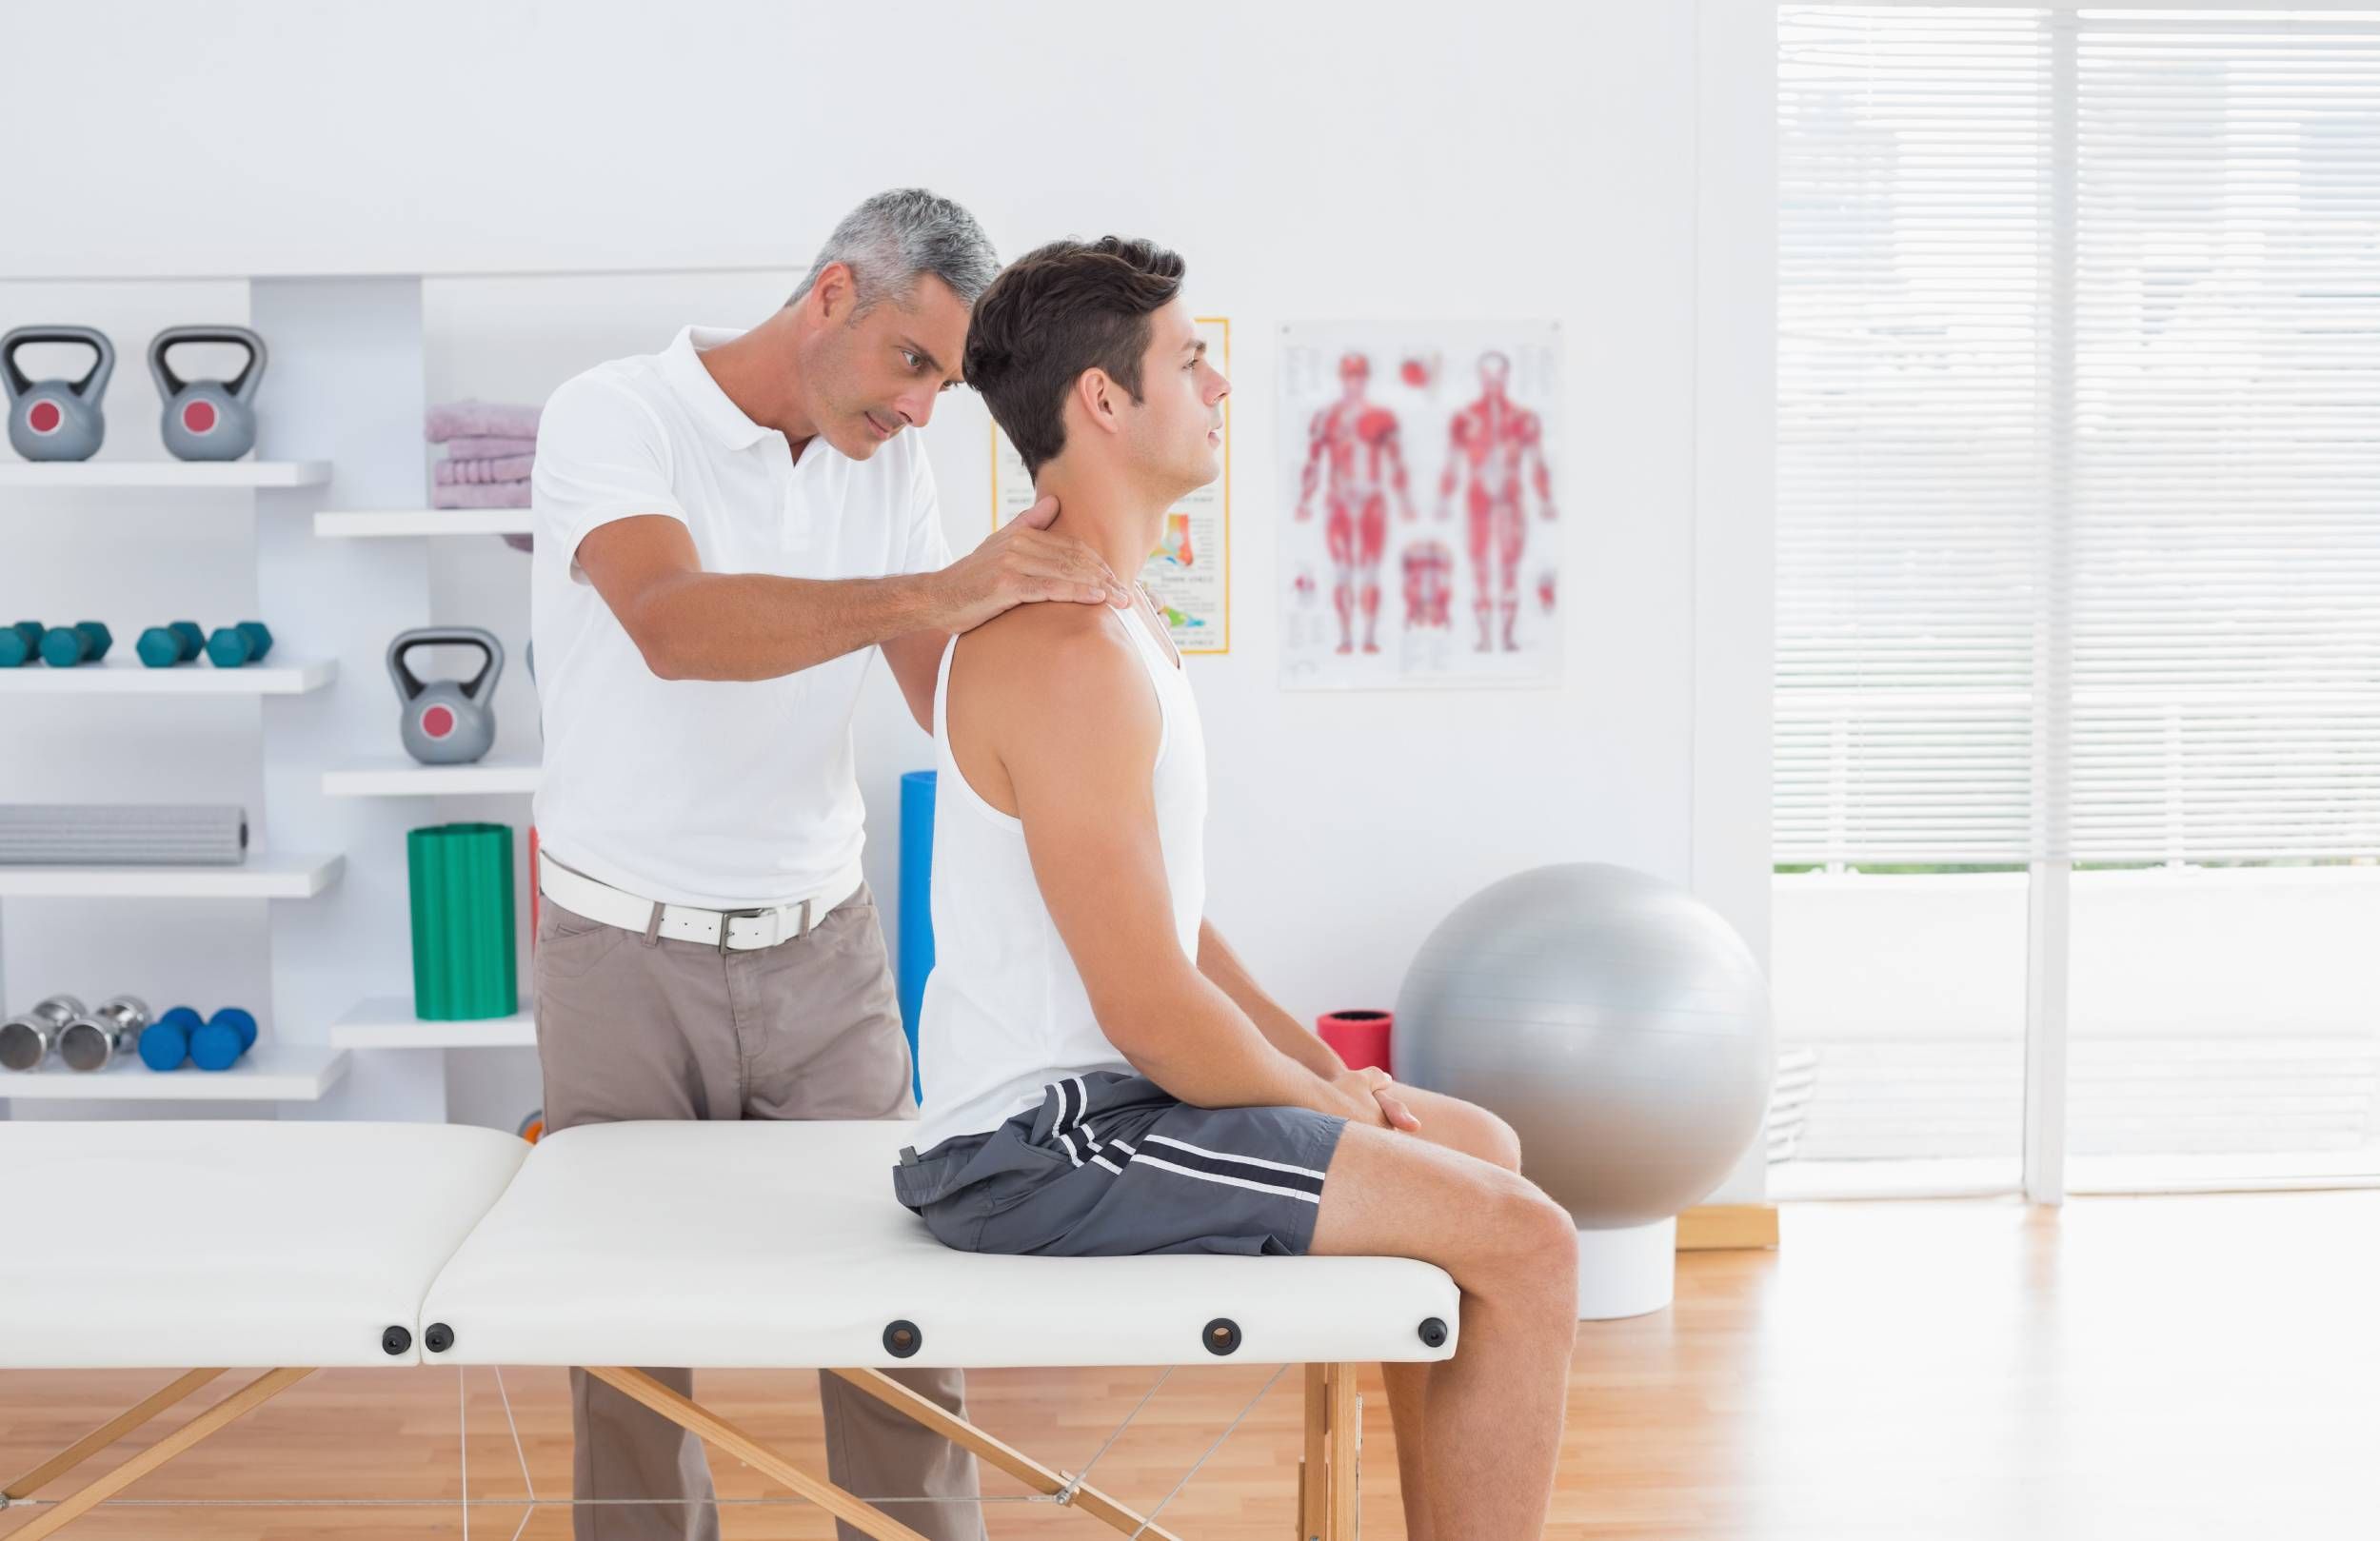 How Soon After a Car Accident Should I See a Chiropractor?